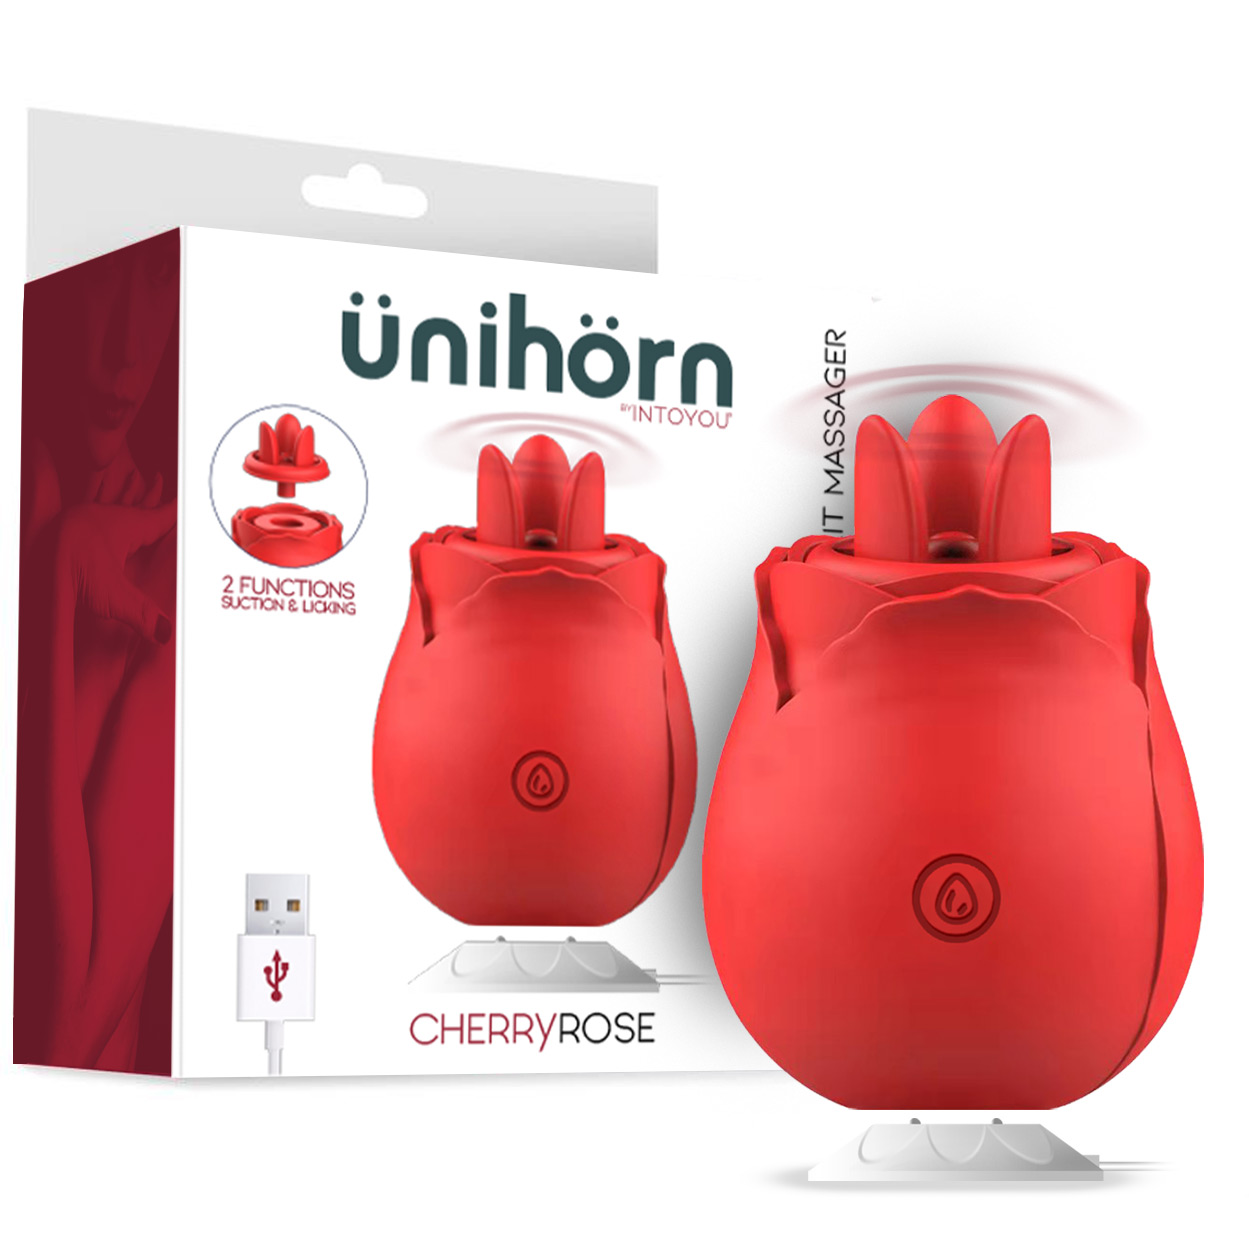 CherryRose  A double pleasure with CherryRose, the new 2 in 1 rose from Ünihörn